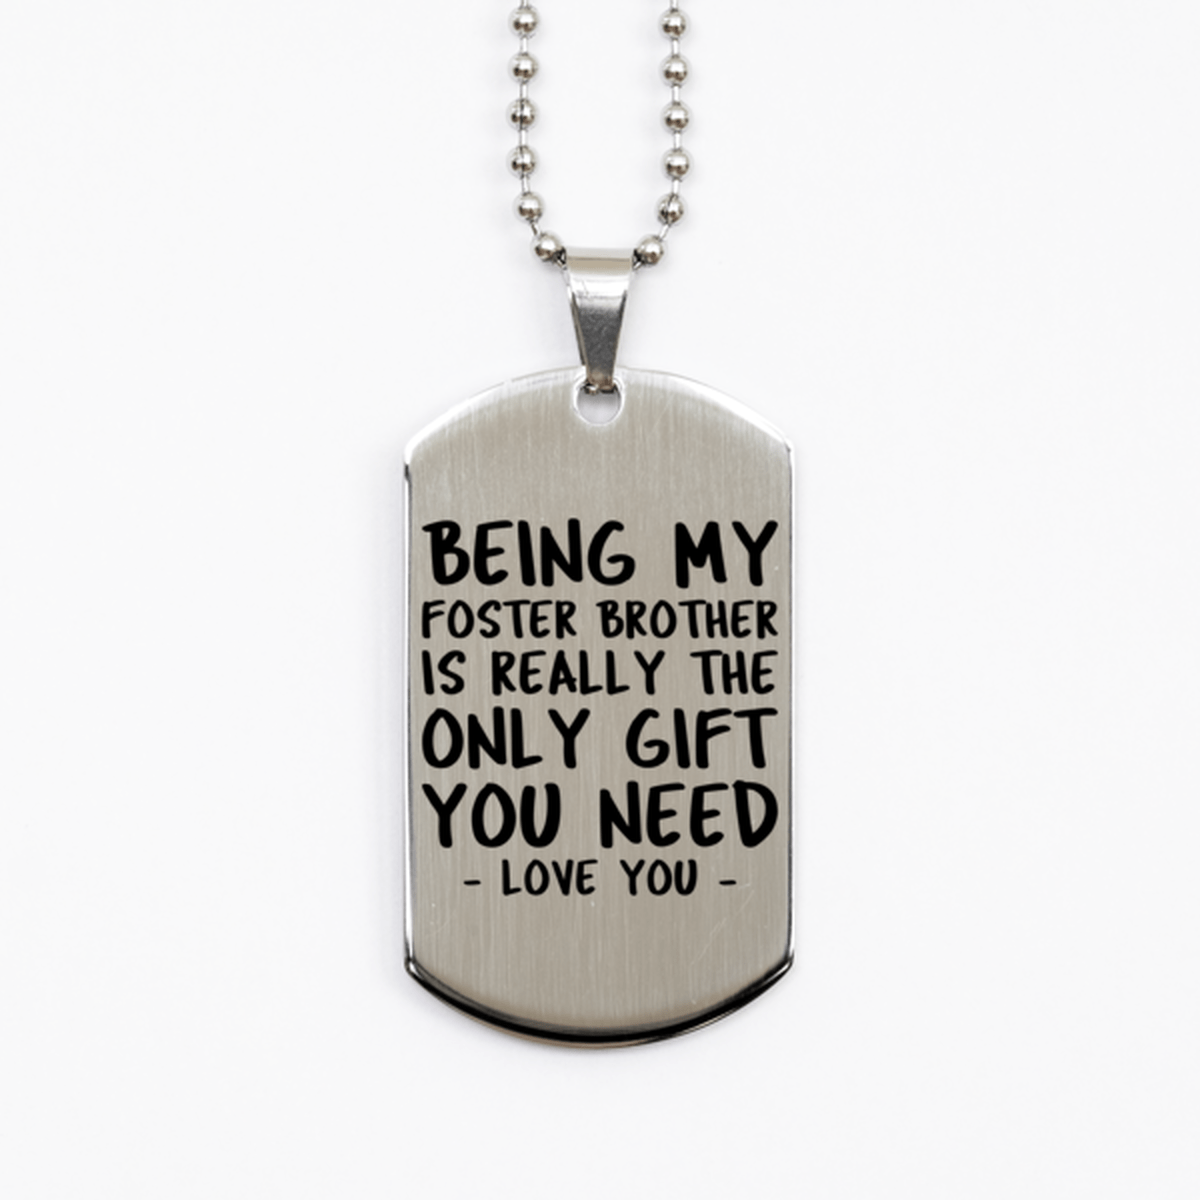 Funny Foster Brother Silver Dog Tag Necklace, Being My Foster Brother Is Really the Only Gift You Need, Best Birthday Gifts for Foster Brother